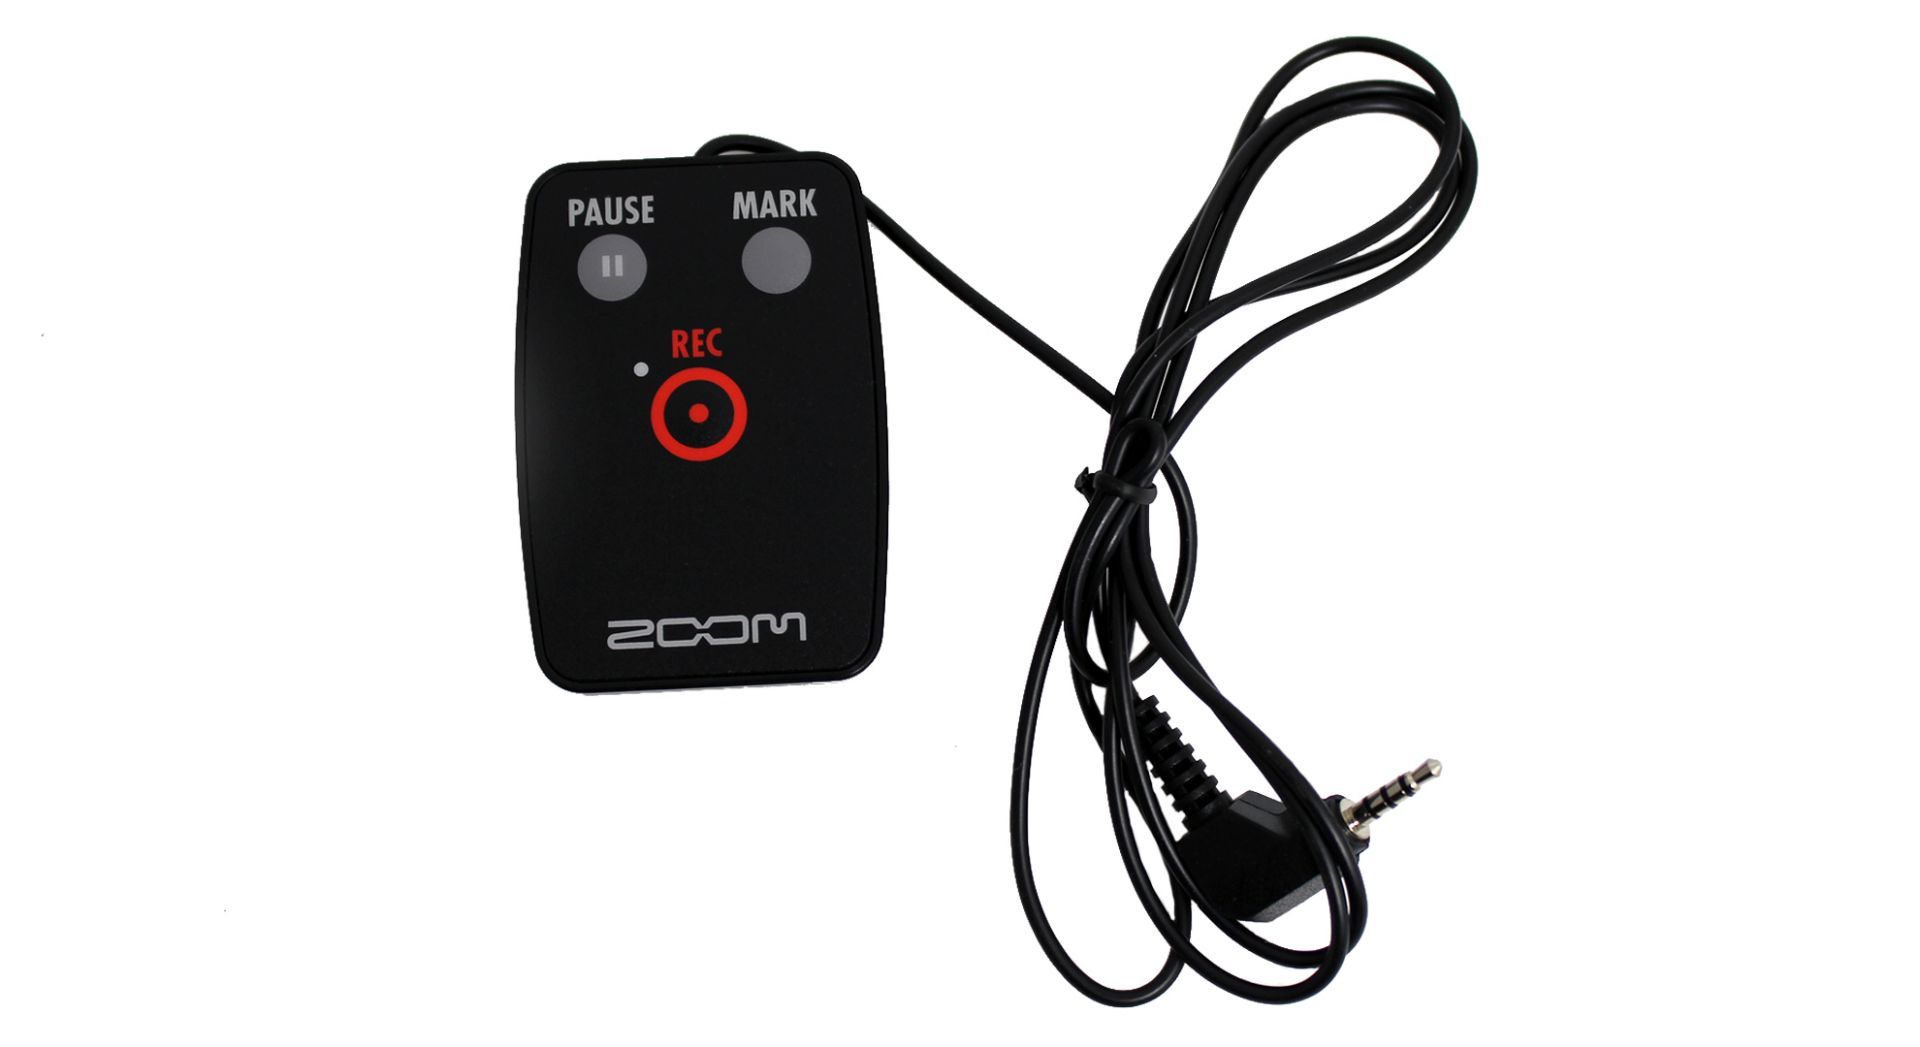 Zoom RC 2